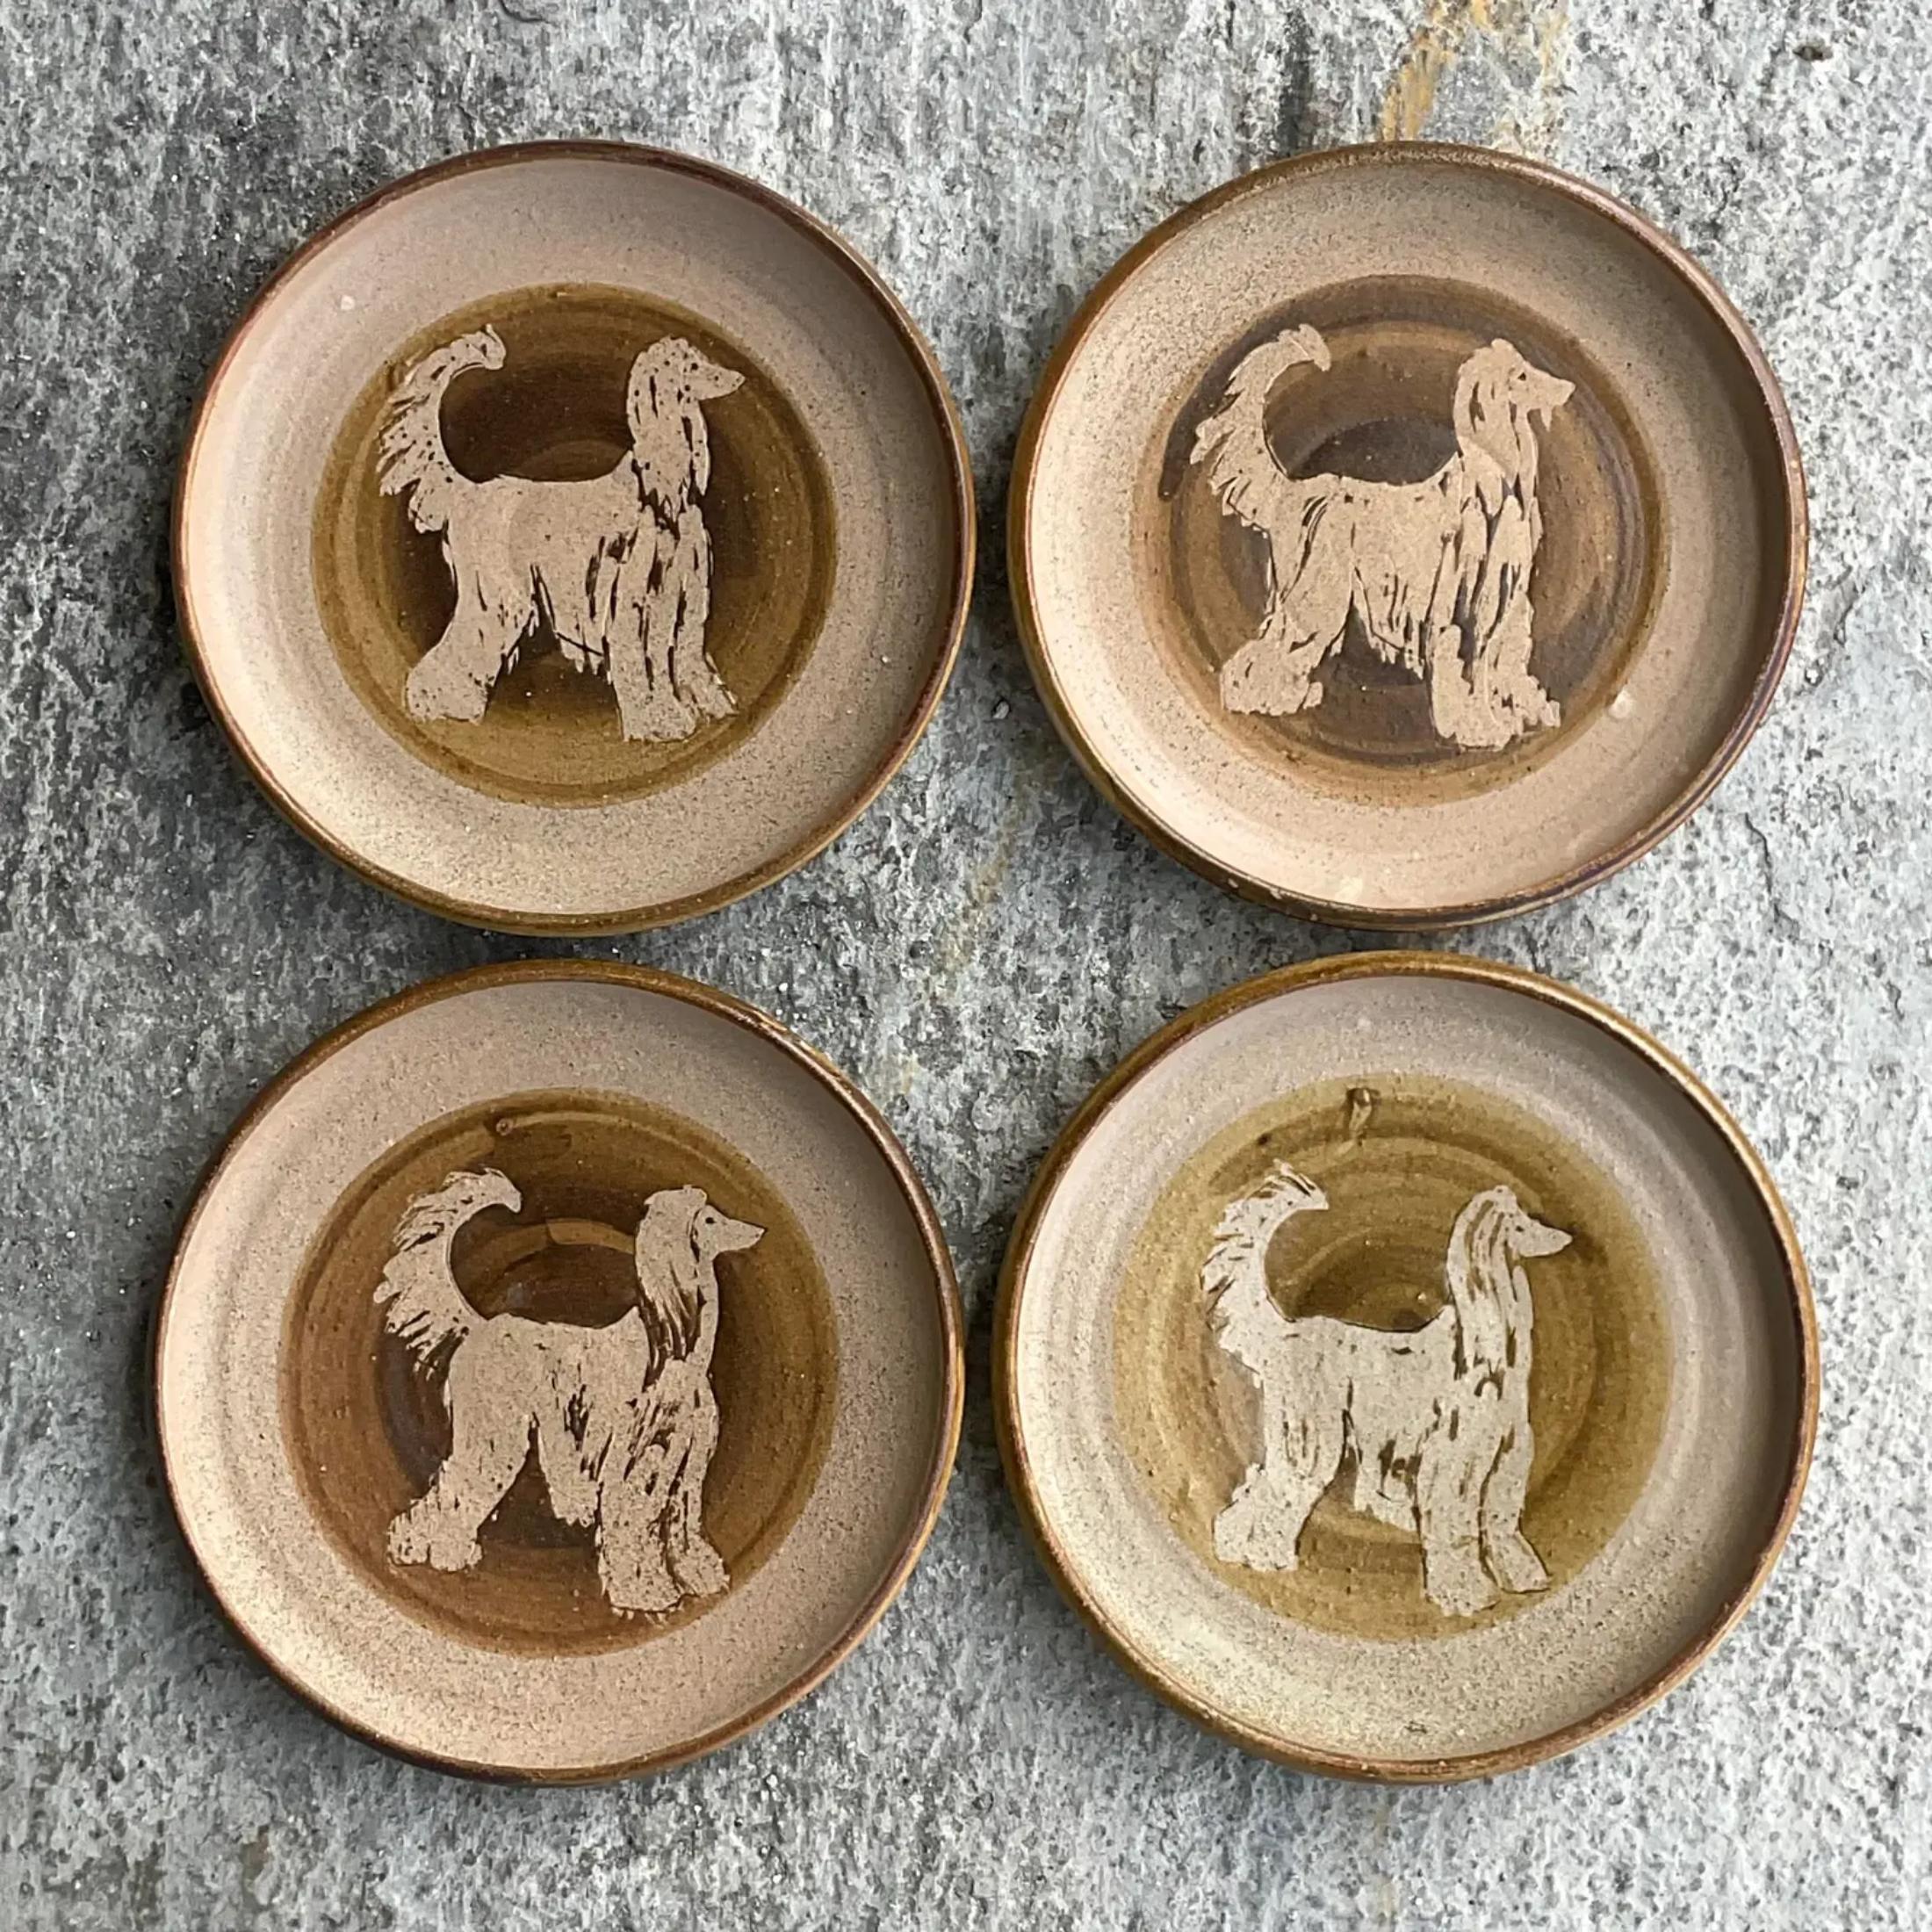 Vintage Boho Signed Studio Pottery Plates With Afghan Dogs - Set of 4 In Good Condition For Sale In west palm beach, FL